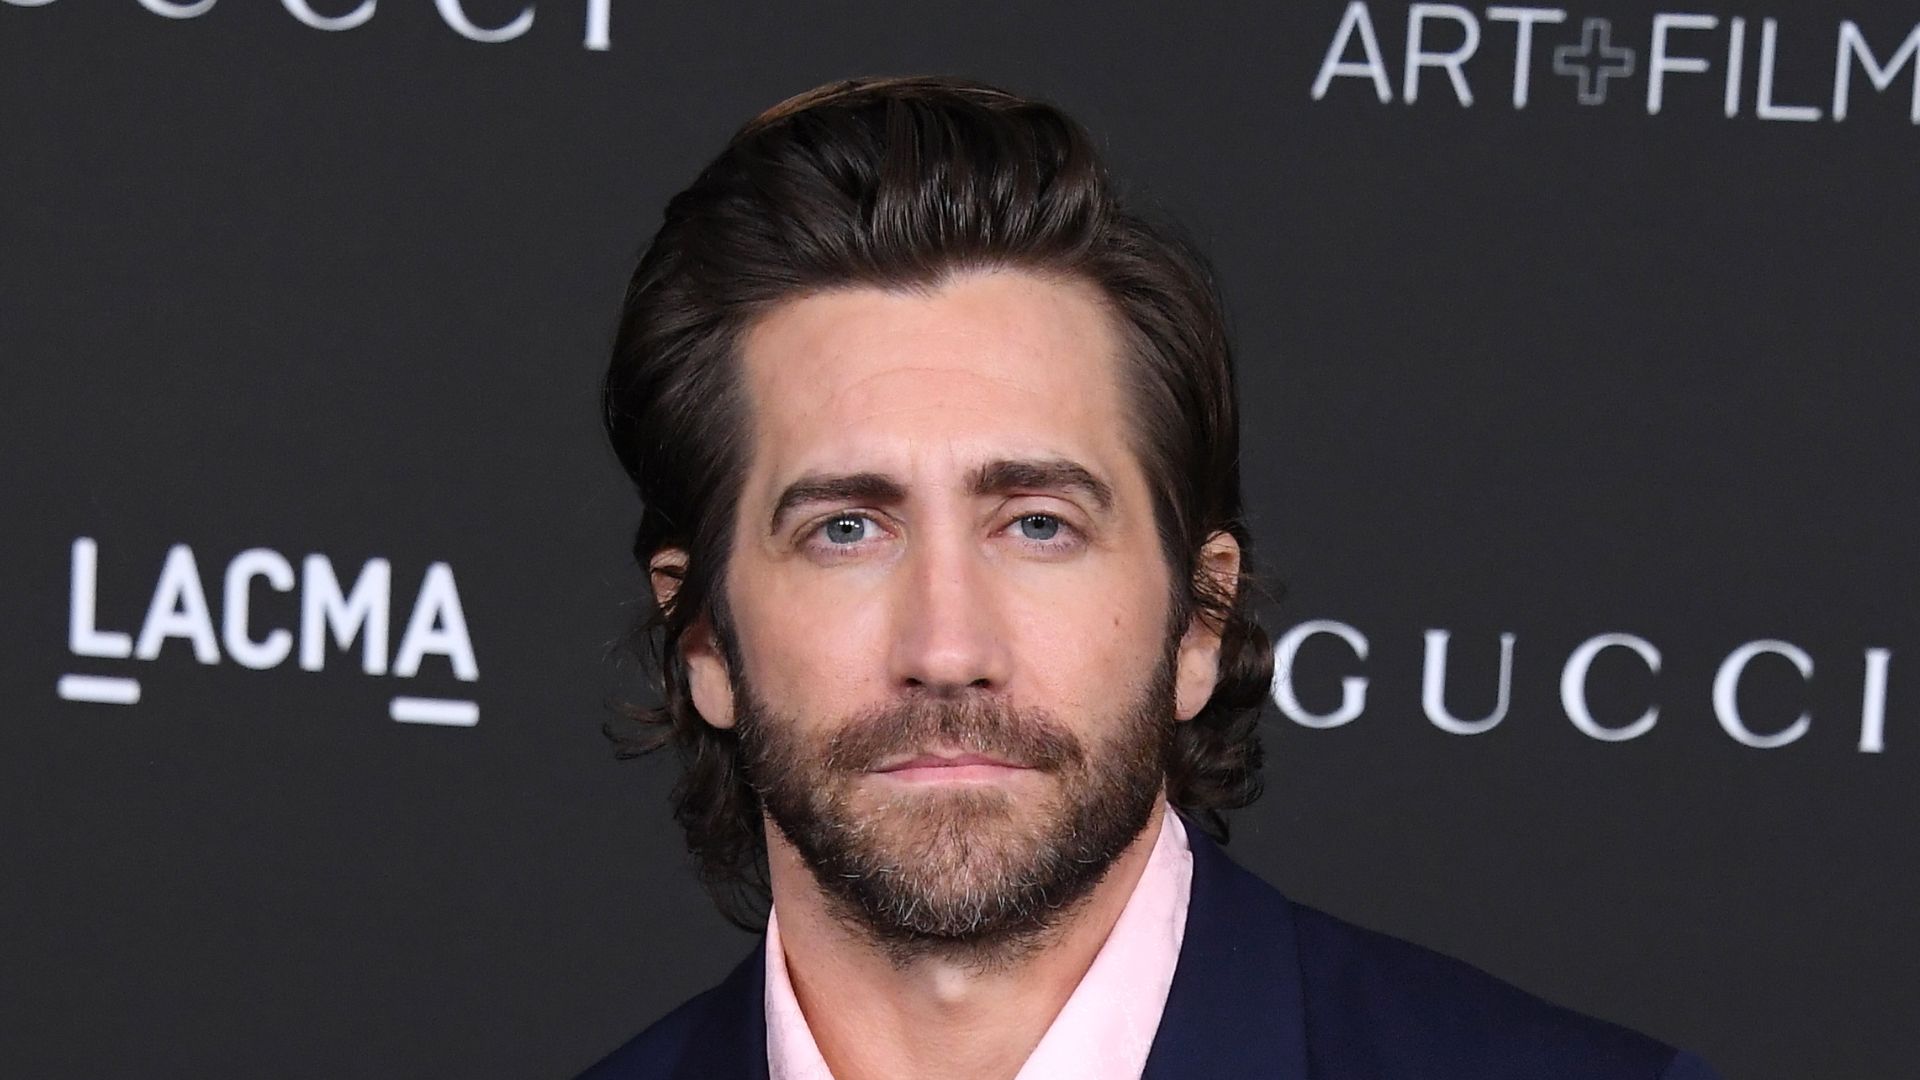 Jake Gyllenhaal Teaming With Michael Bay For Action Project | Film News -  CONVERSATIONS ABOUT HER